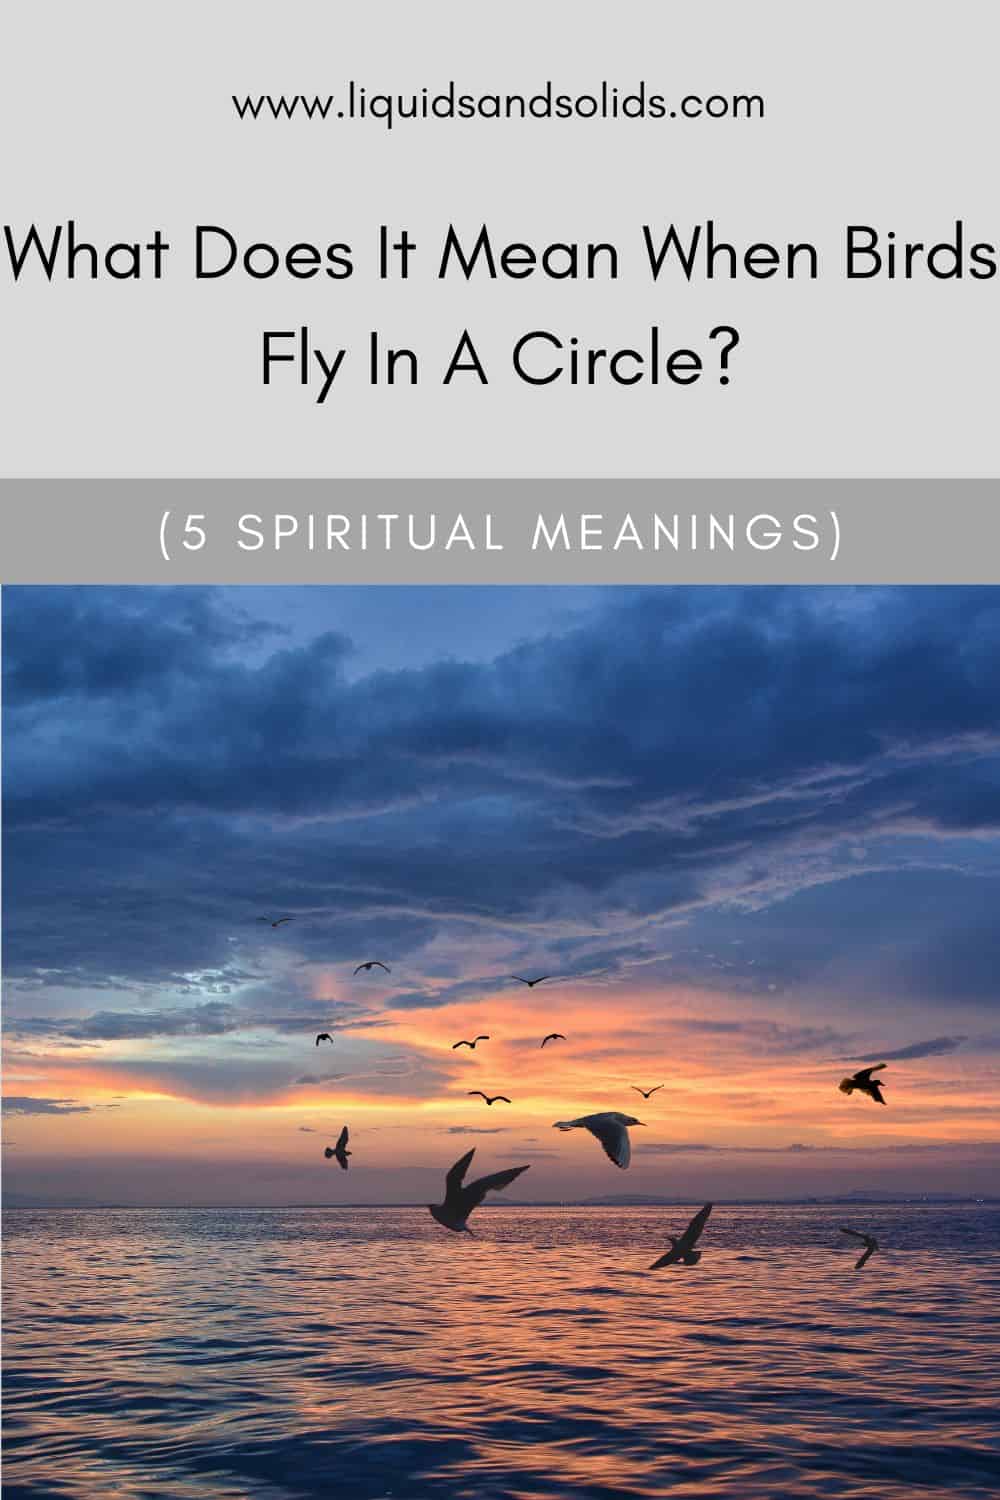 What Does It Mean When Birds Fly In A Circle? (5 Spiritual Meanings)